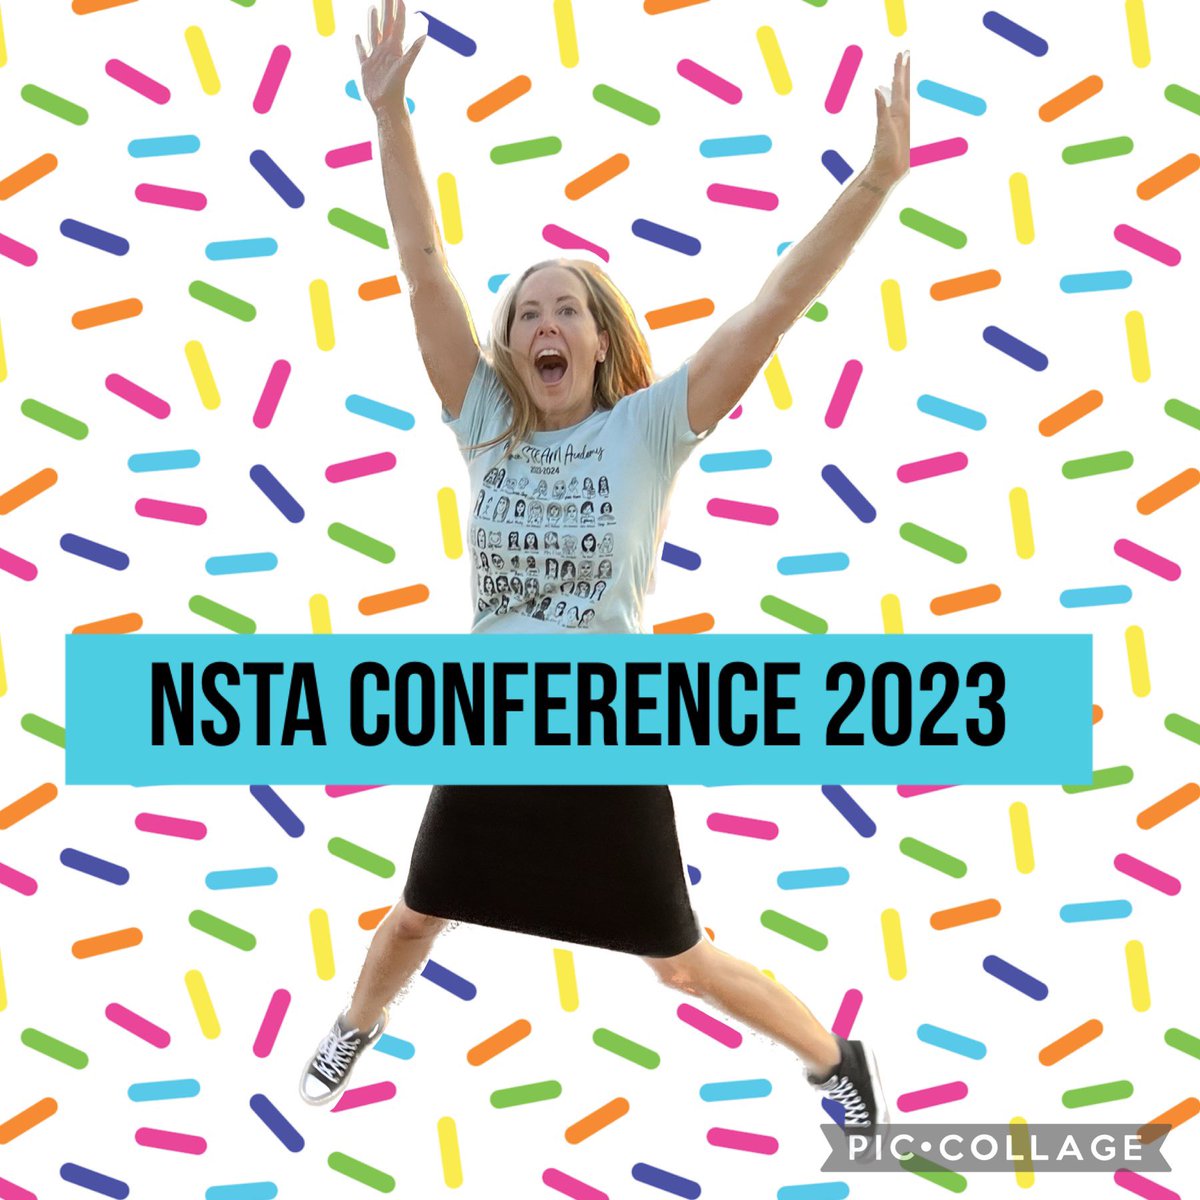 I’m excited to present @NSTA Conference next week on Saturday at 1:20pm and share all about @NISEstem and @WilemonSTEAM - “Become STEM Certified - Your Journey to Success Begins Here!” #wilemonsteam #weleadtx #nise #stemeducation